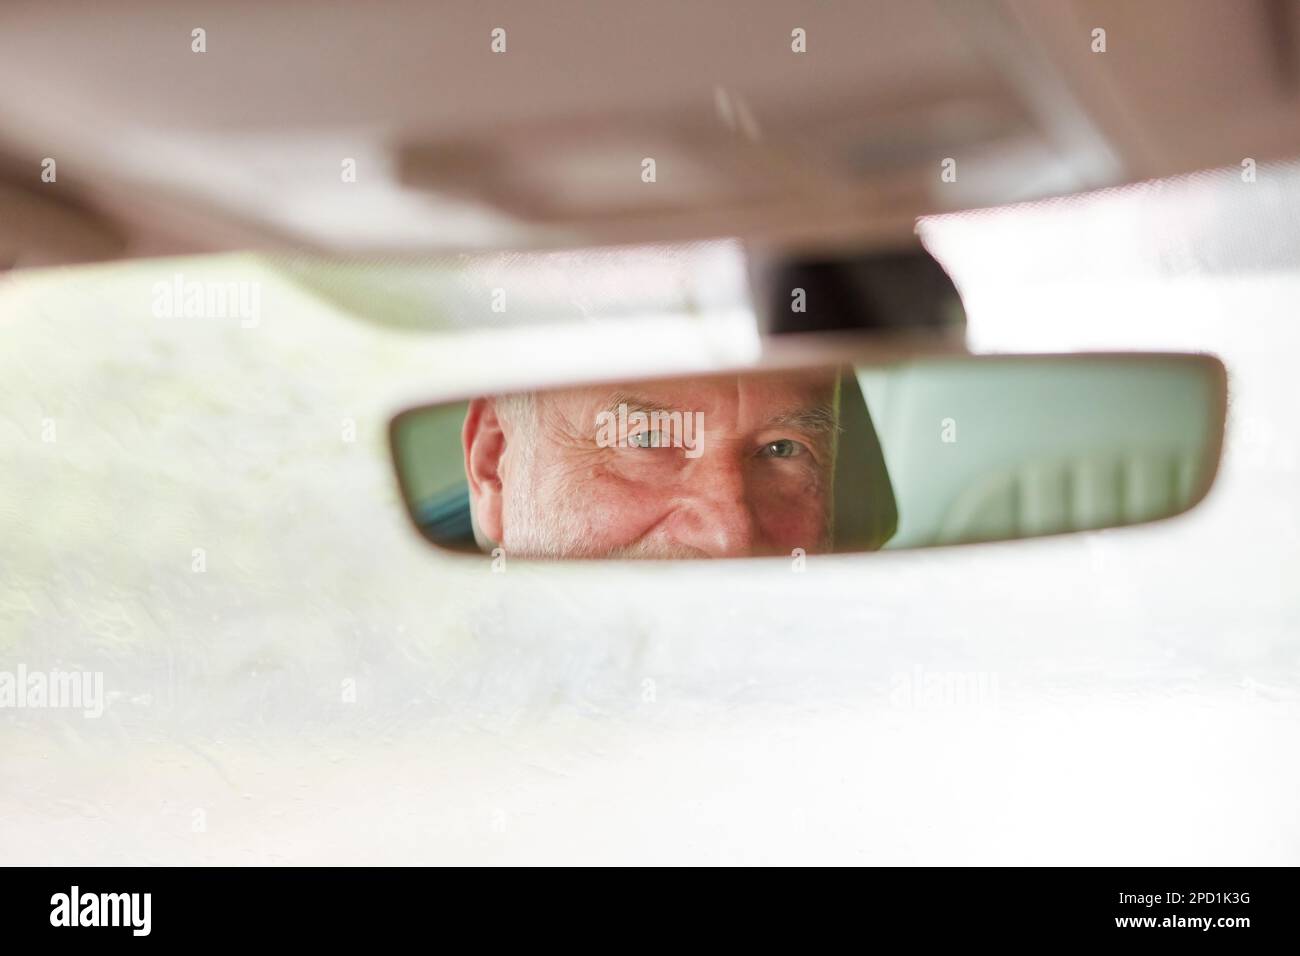 Reflection of elderly man on car's rear-view mirror during road trip Stock Photo